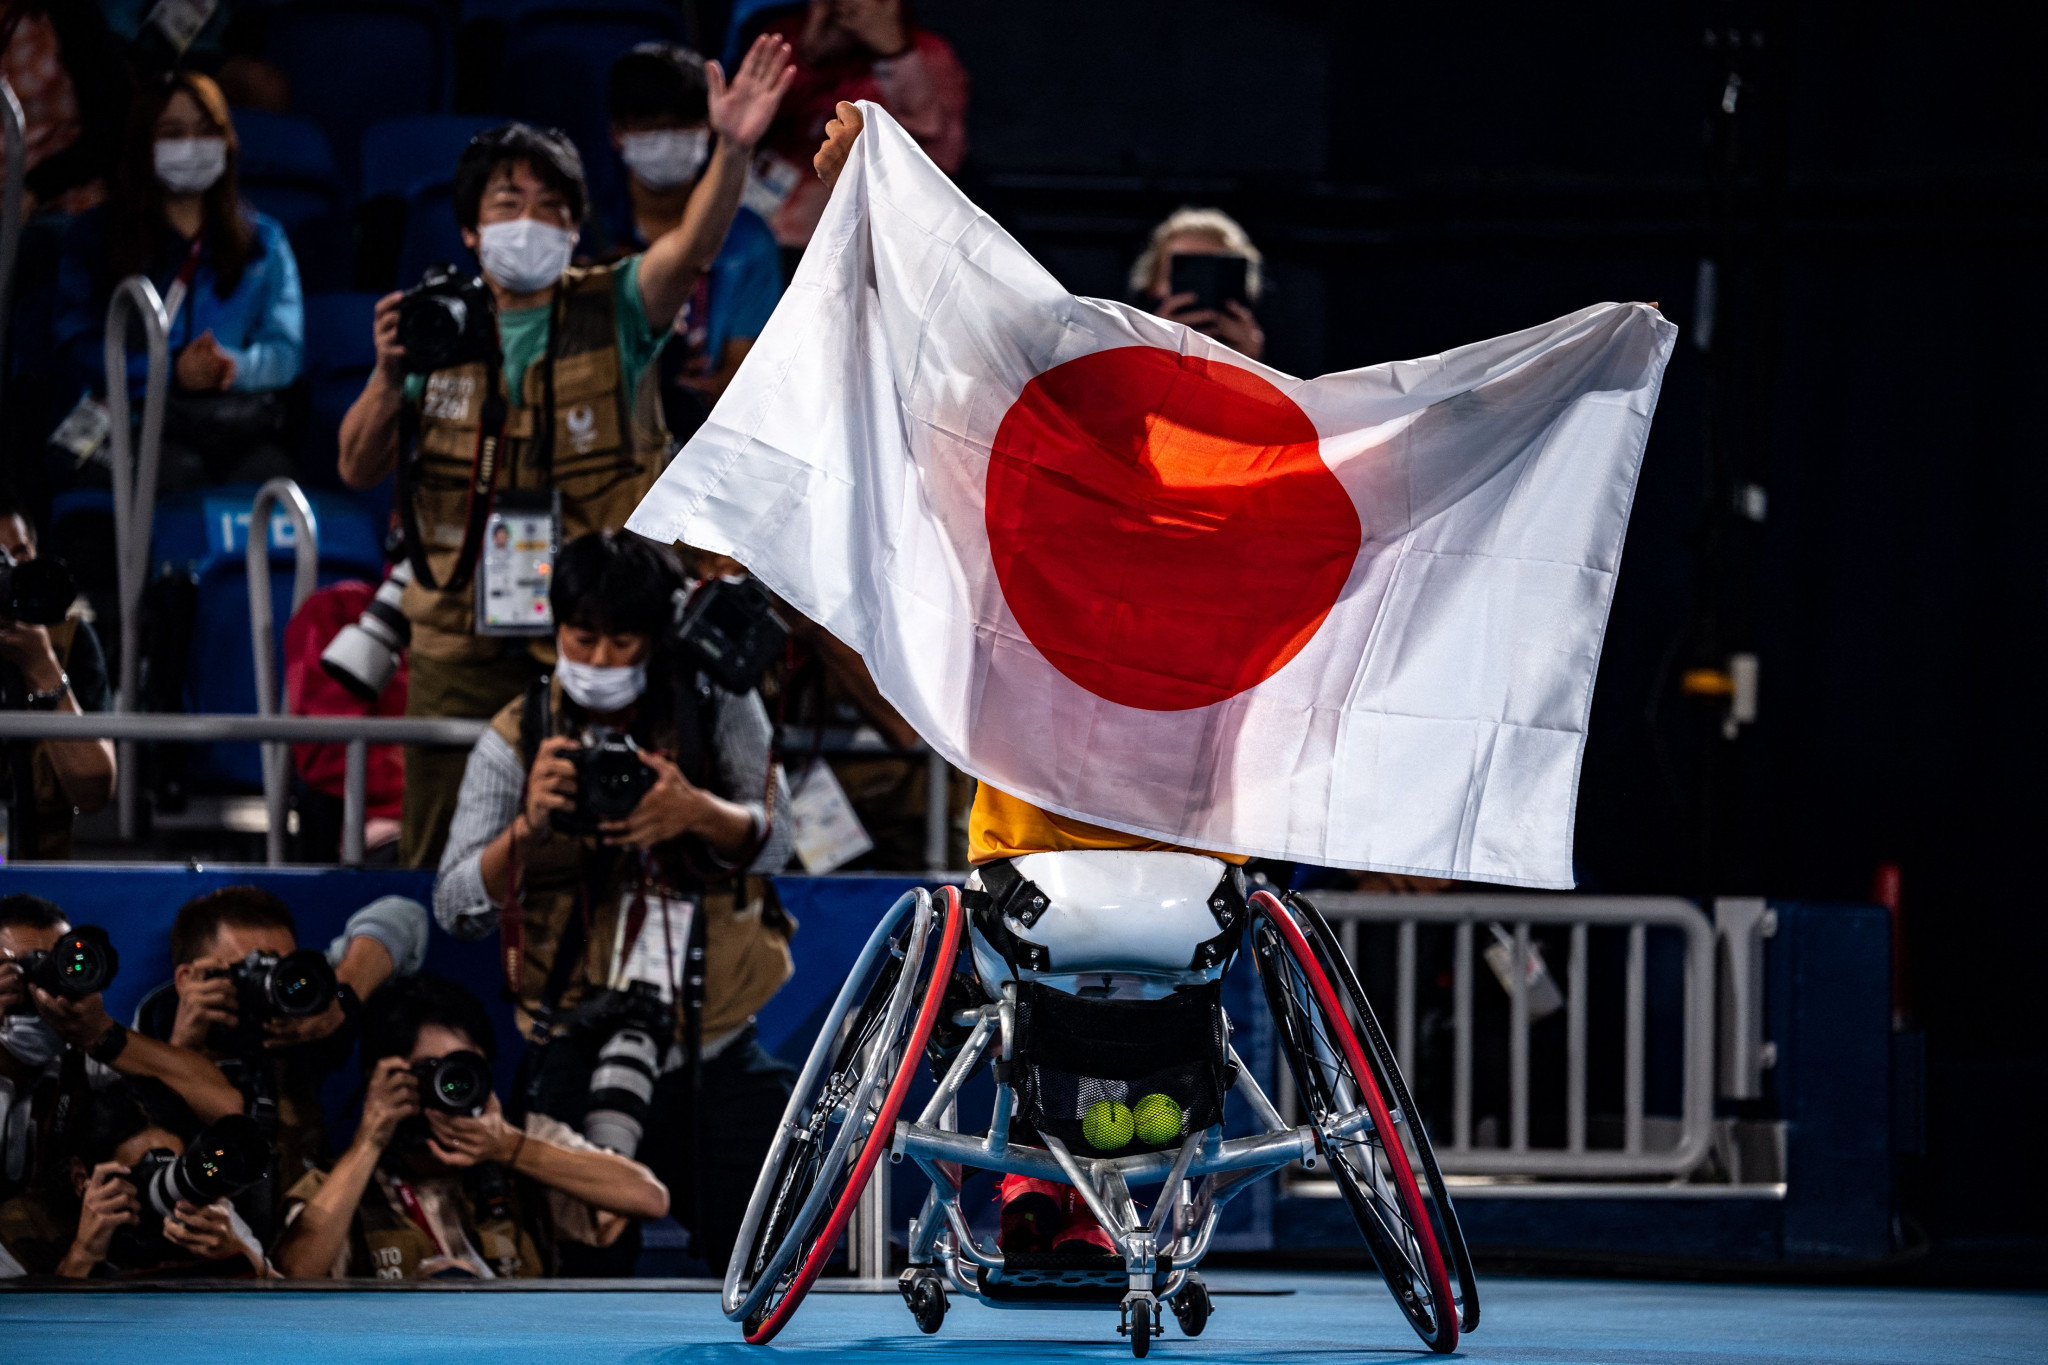 Japan's Para sports teams have had a funding boost, while others saw a decrease due to COVID-19 ©Getty Images